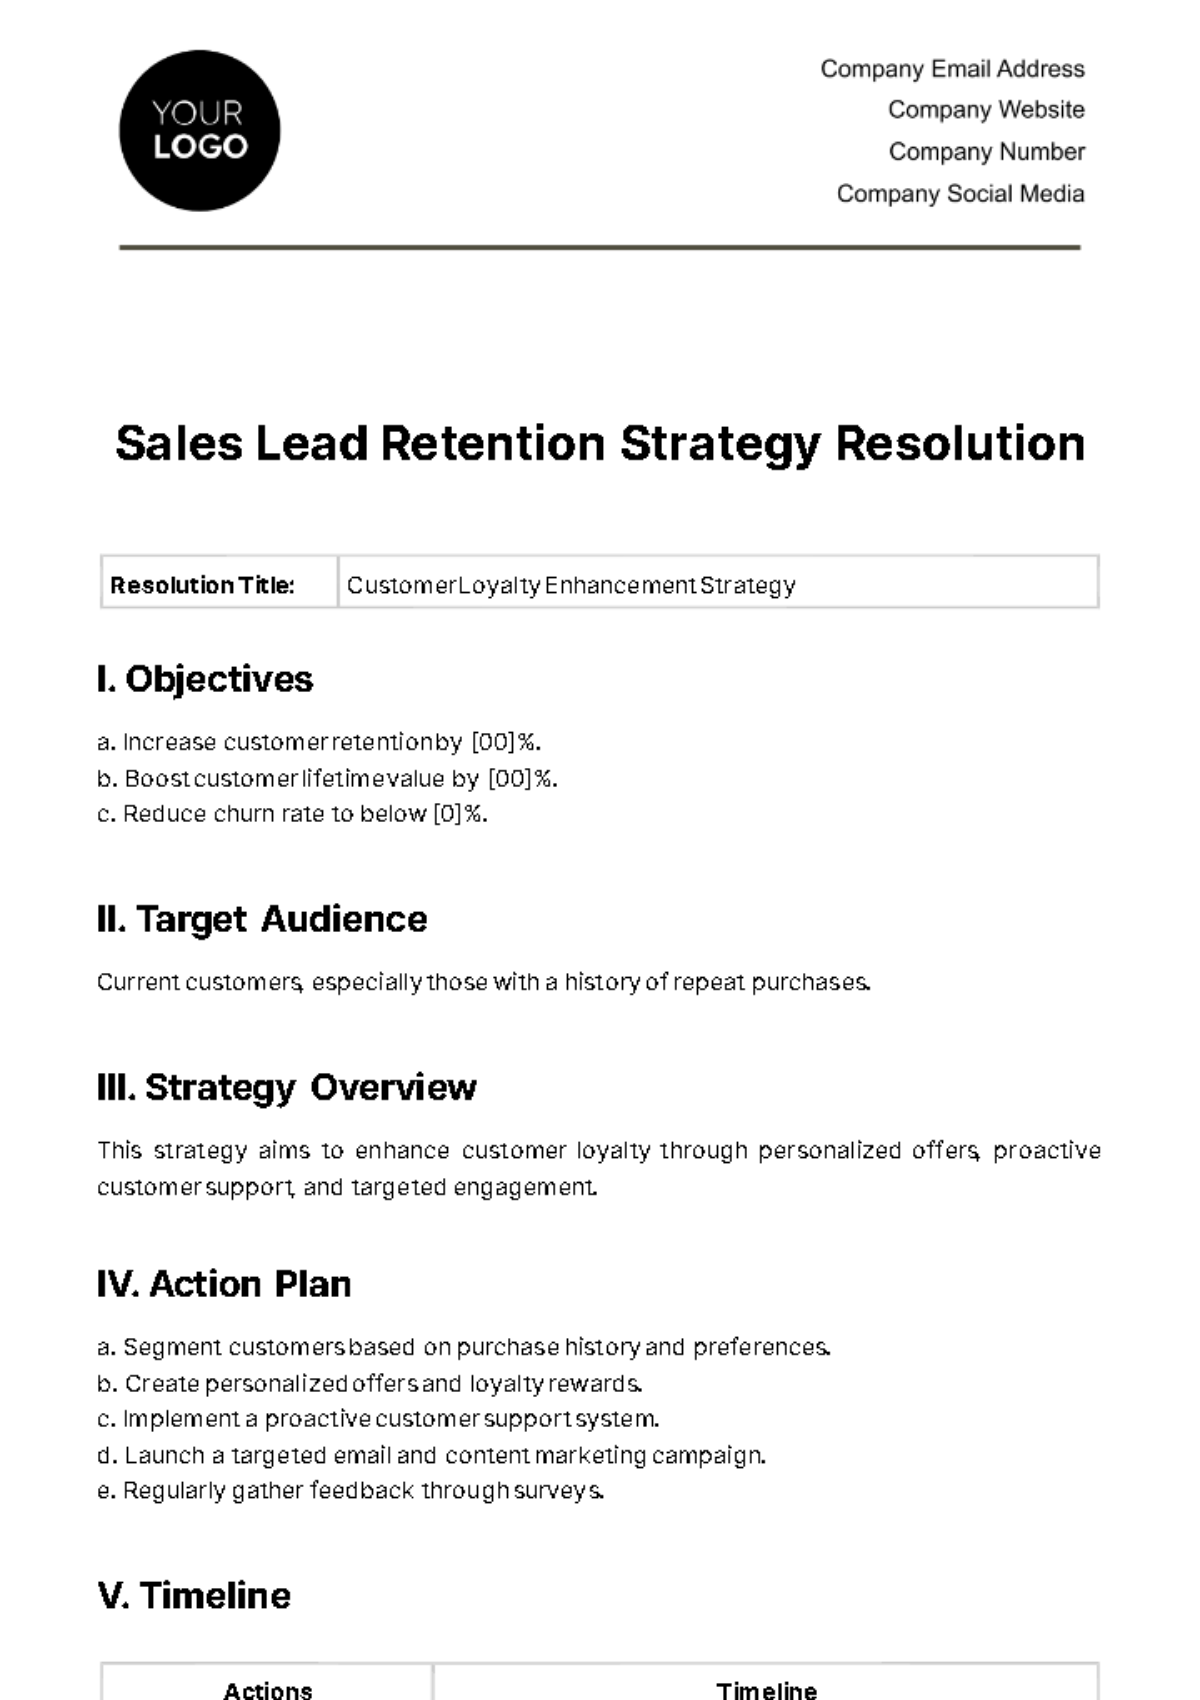 Free Sales Lead Retention Strategy Resolution Template